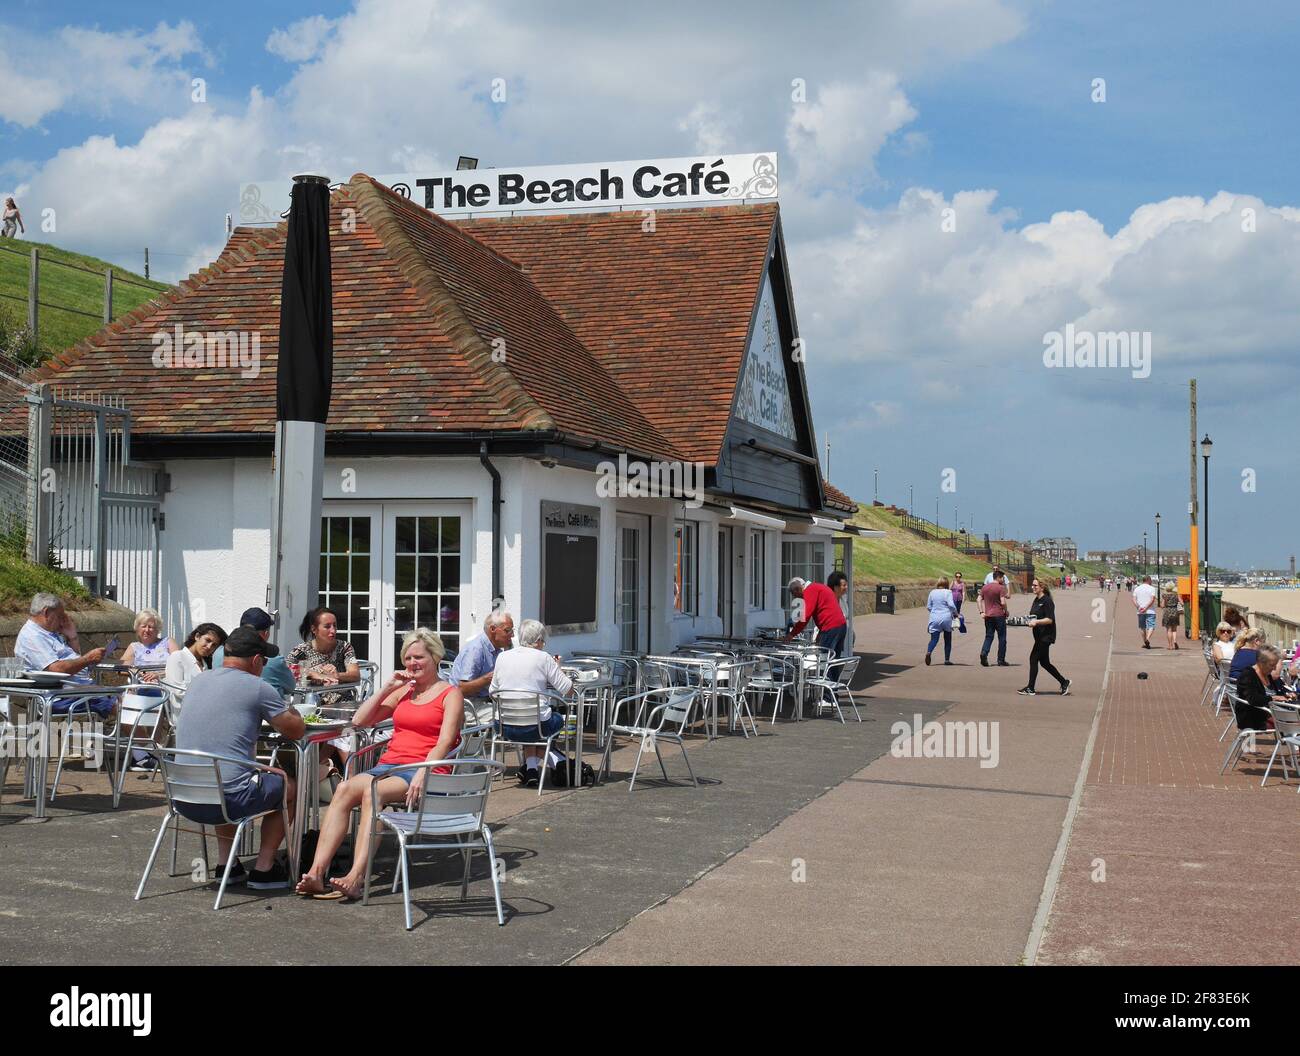 The Promenade and Busy Beach Cafe at The Seaside Resort of Gorleston, Nr Great Yarmouth, Norfolk, England, UK Stock Photo